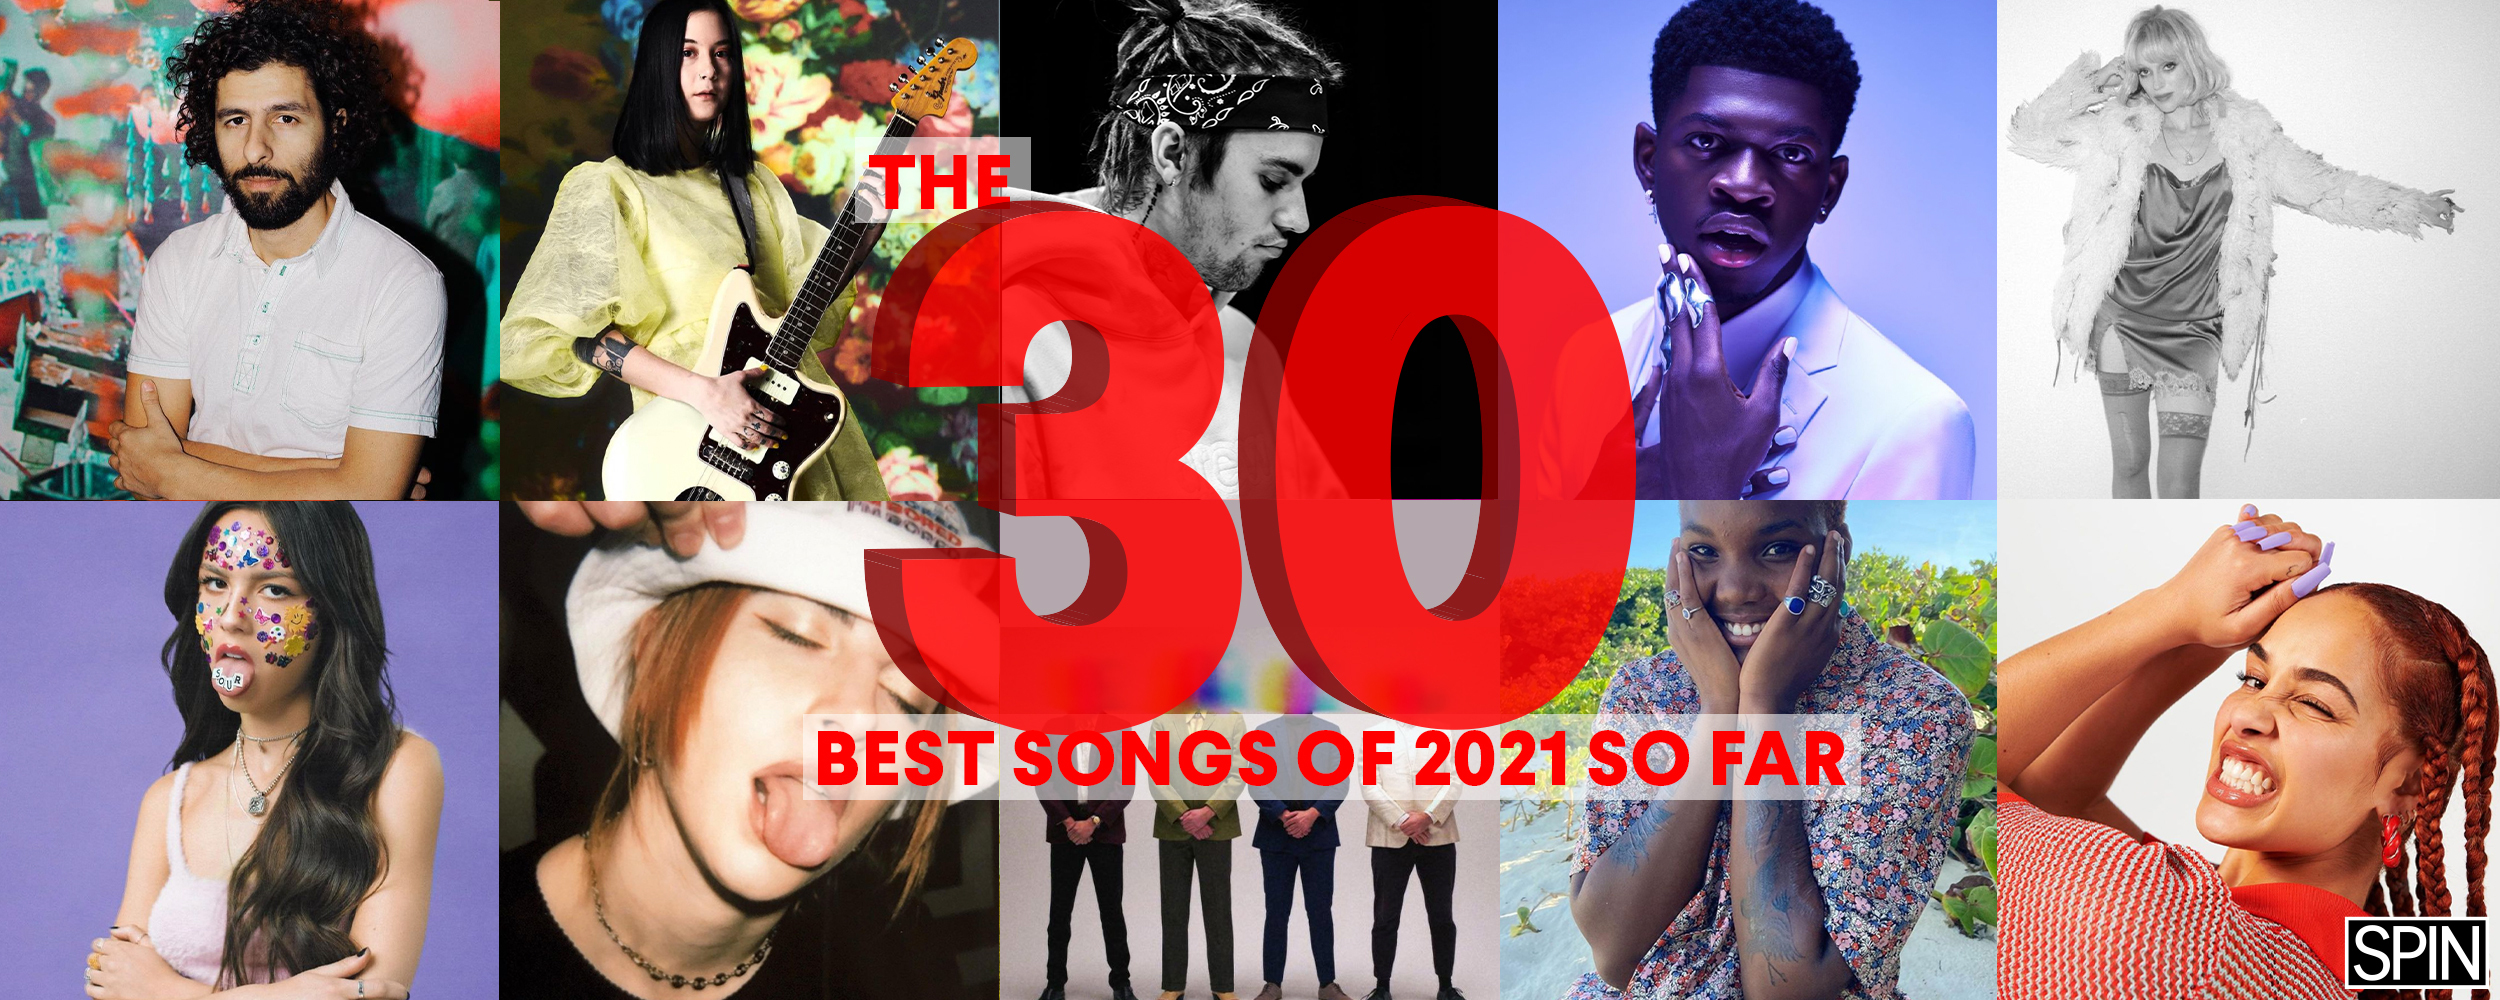 The Best Songs of 2021